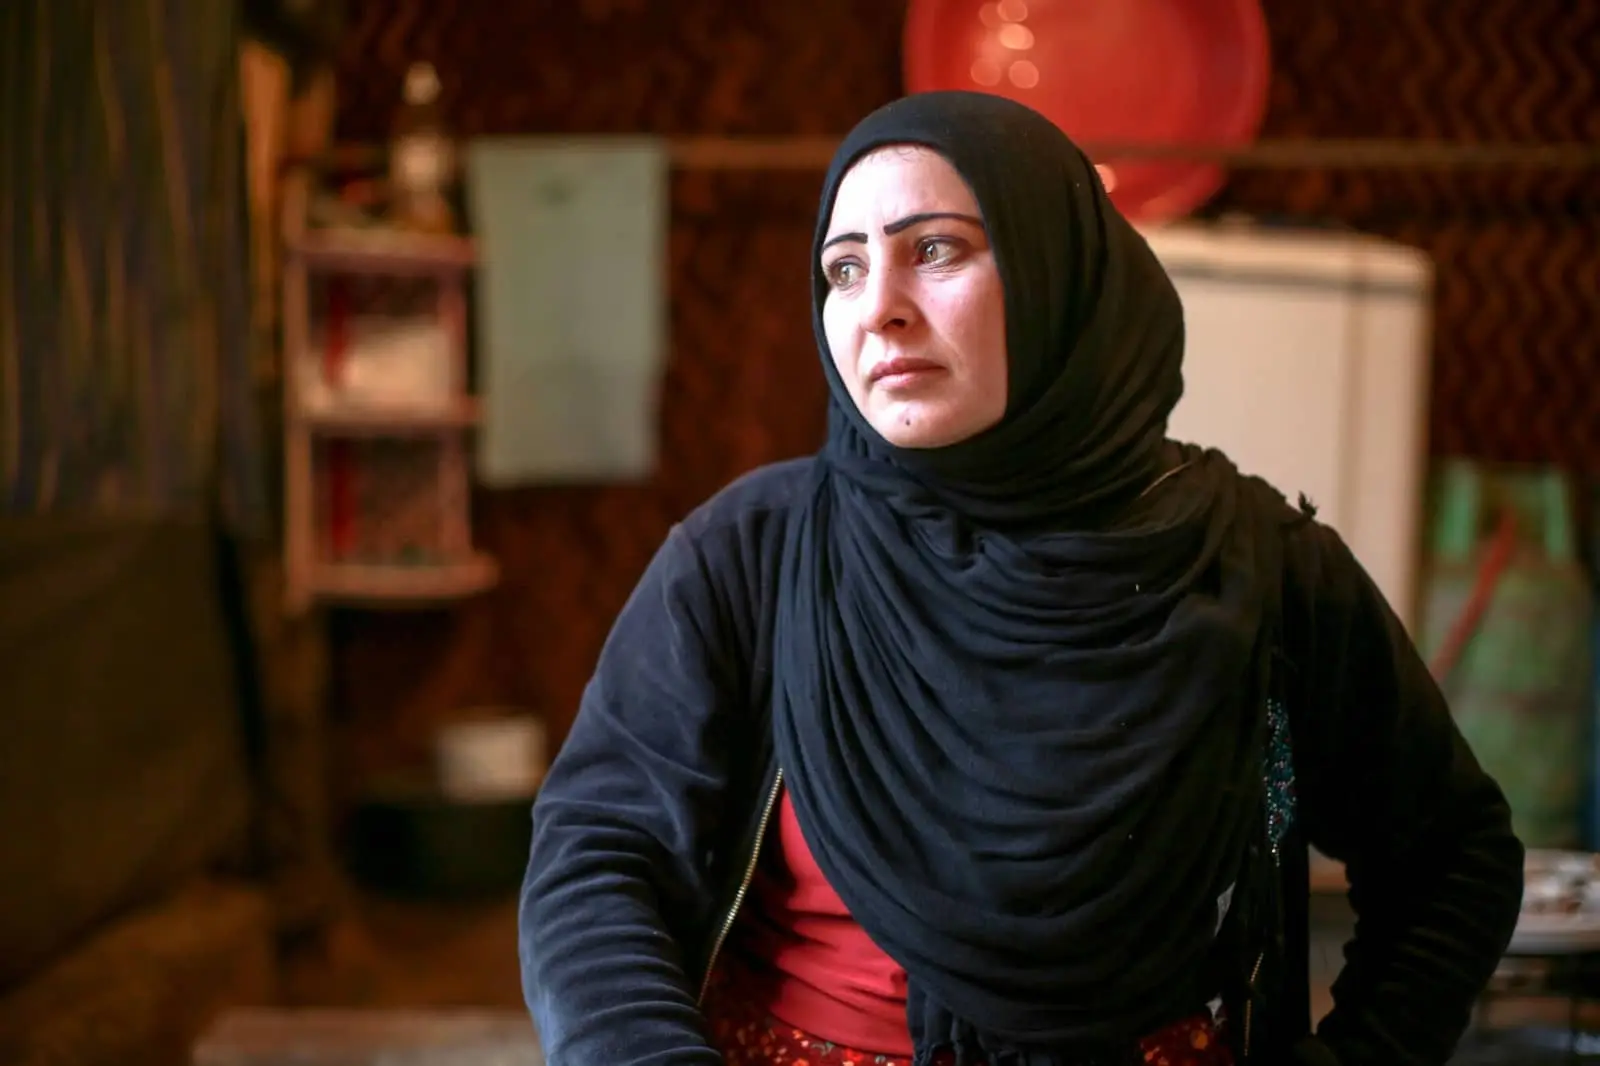 5 unique challenges facing Syrian refugee women